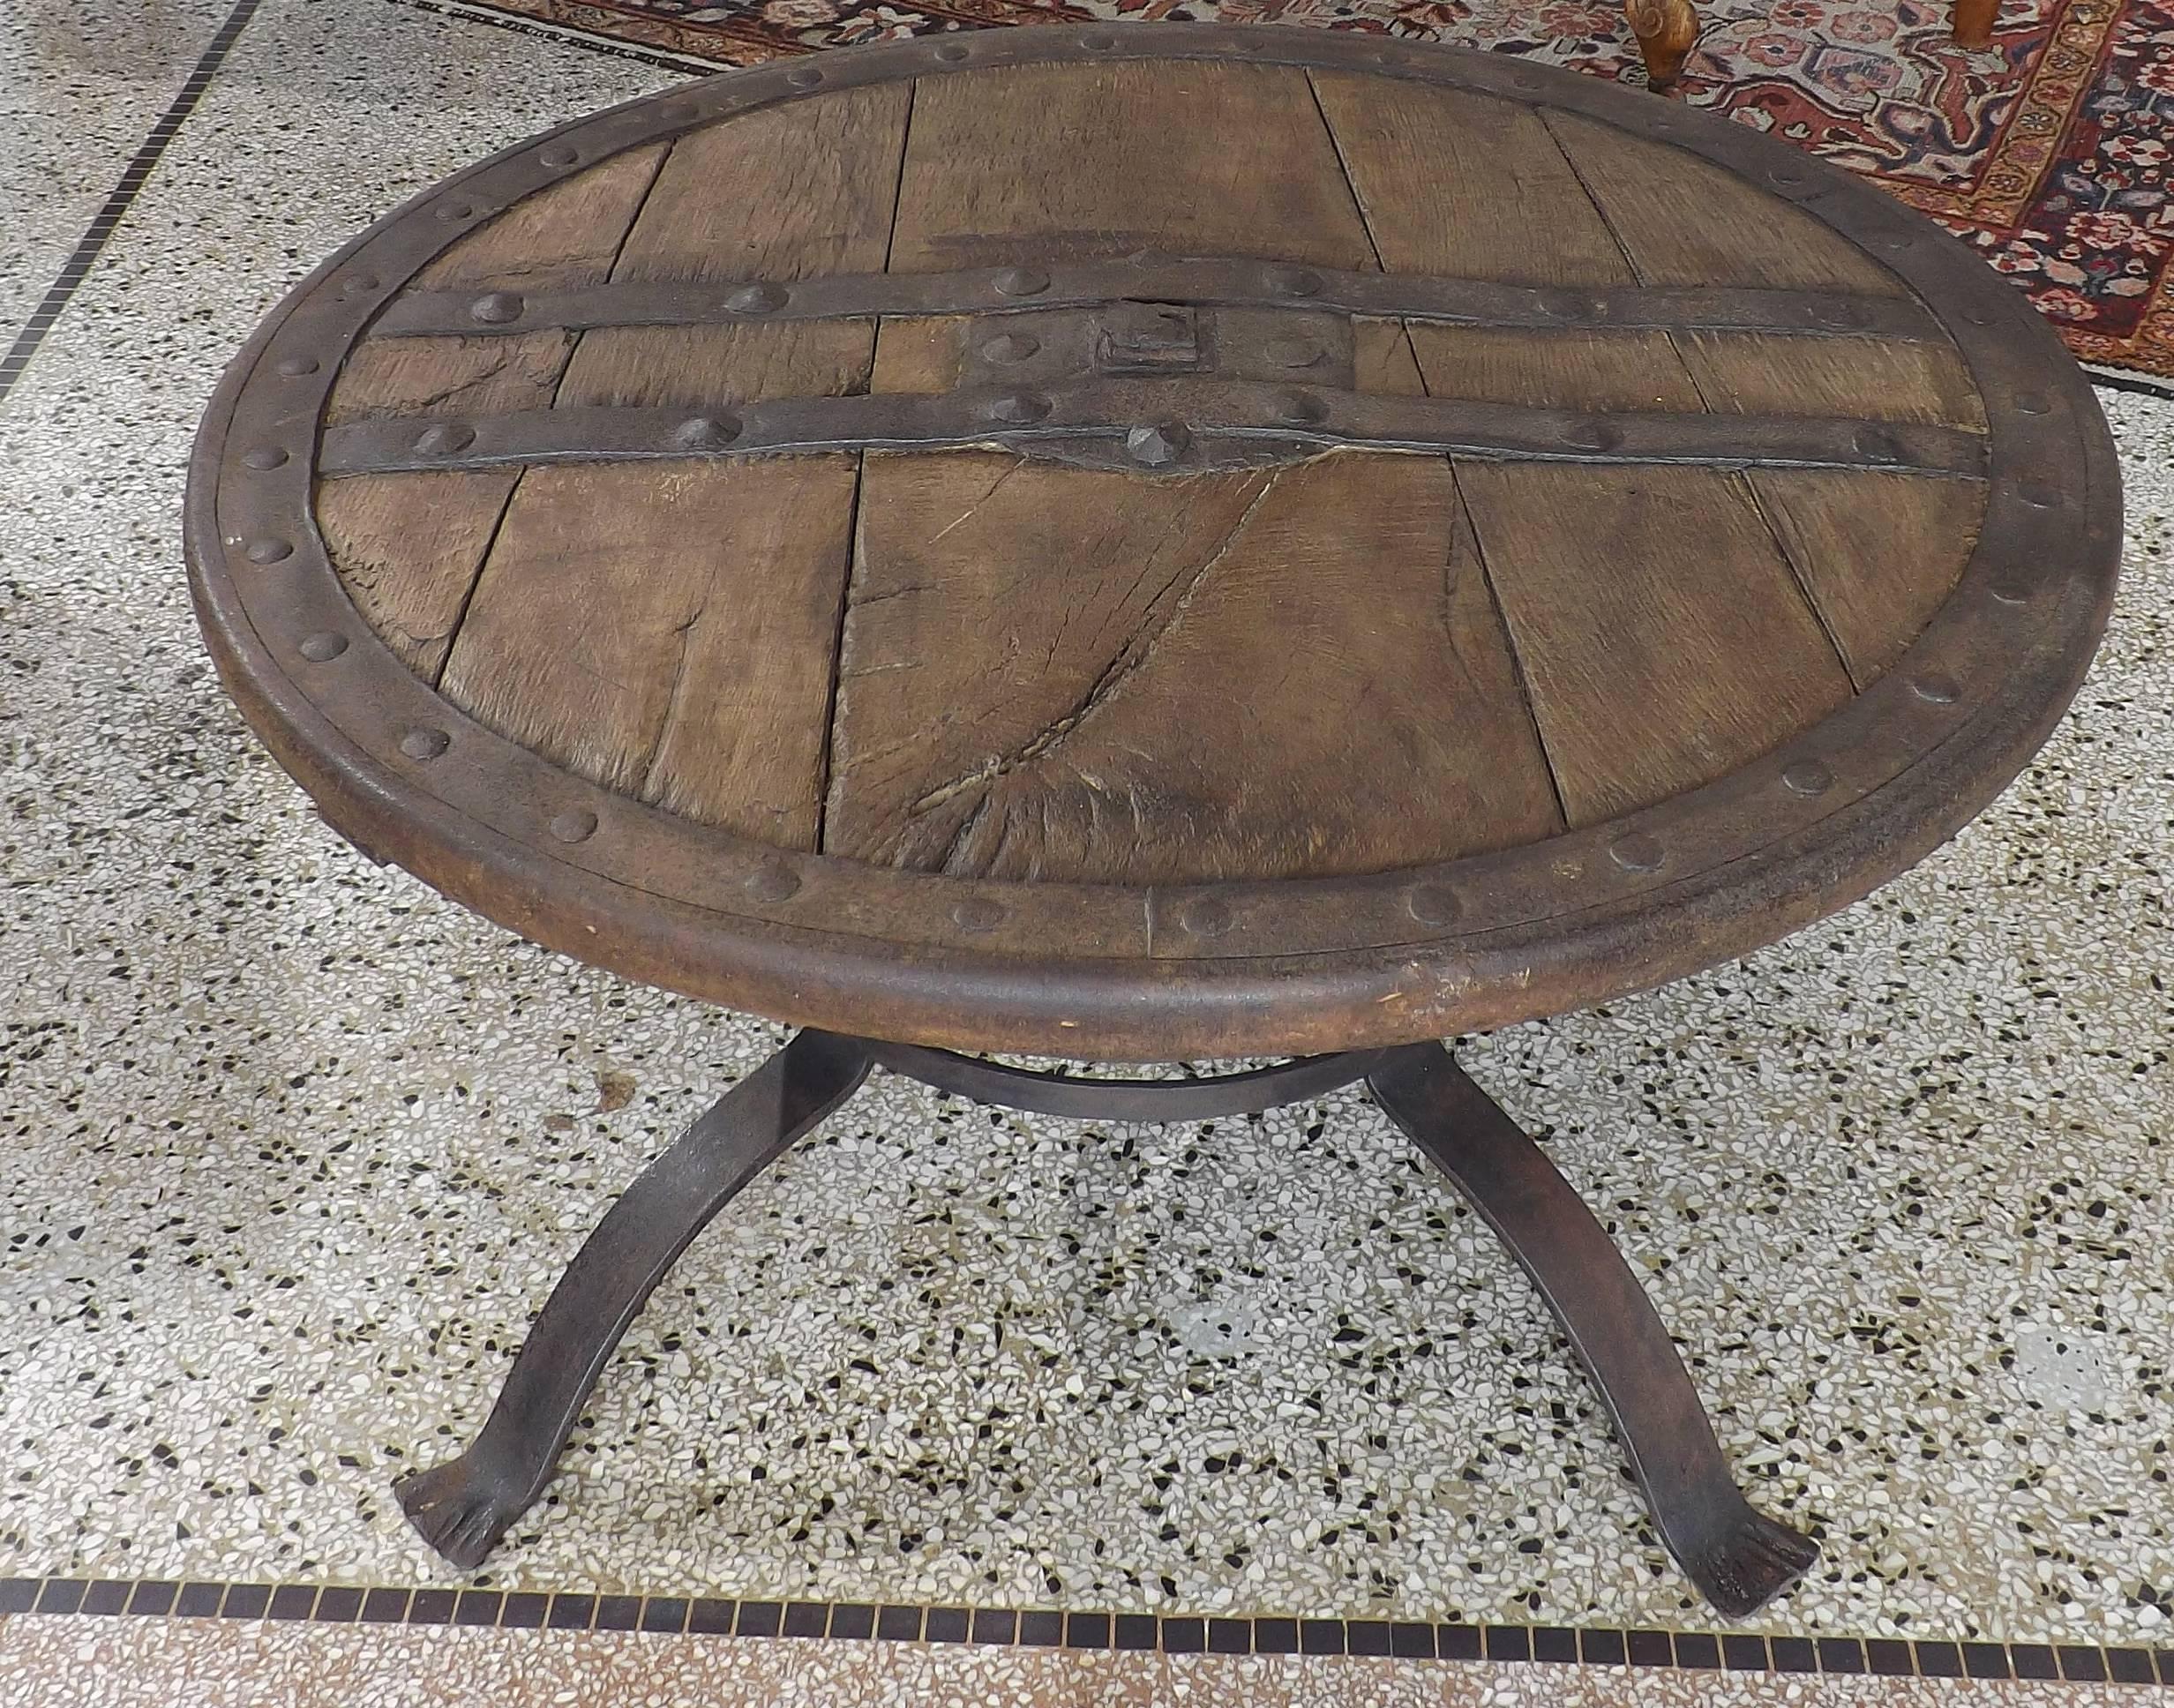 Heavy sturdy wheel dating from the middle ages of European origin. Hand-forged riveted rim with iron cross straps on both sides. Also included is a handsome hand-wrought base, circa 1900 for display or to use as a coffee table.